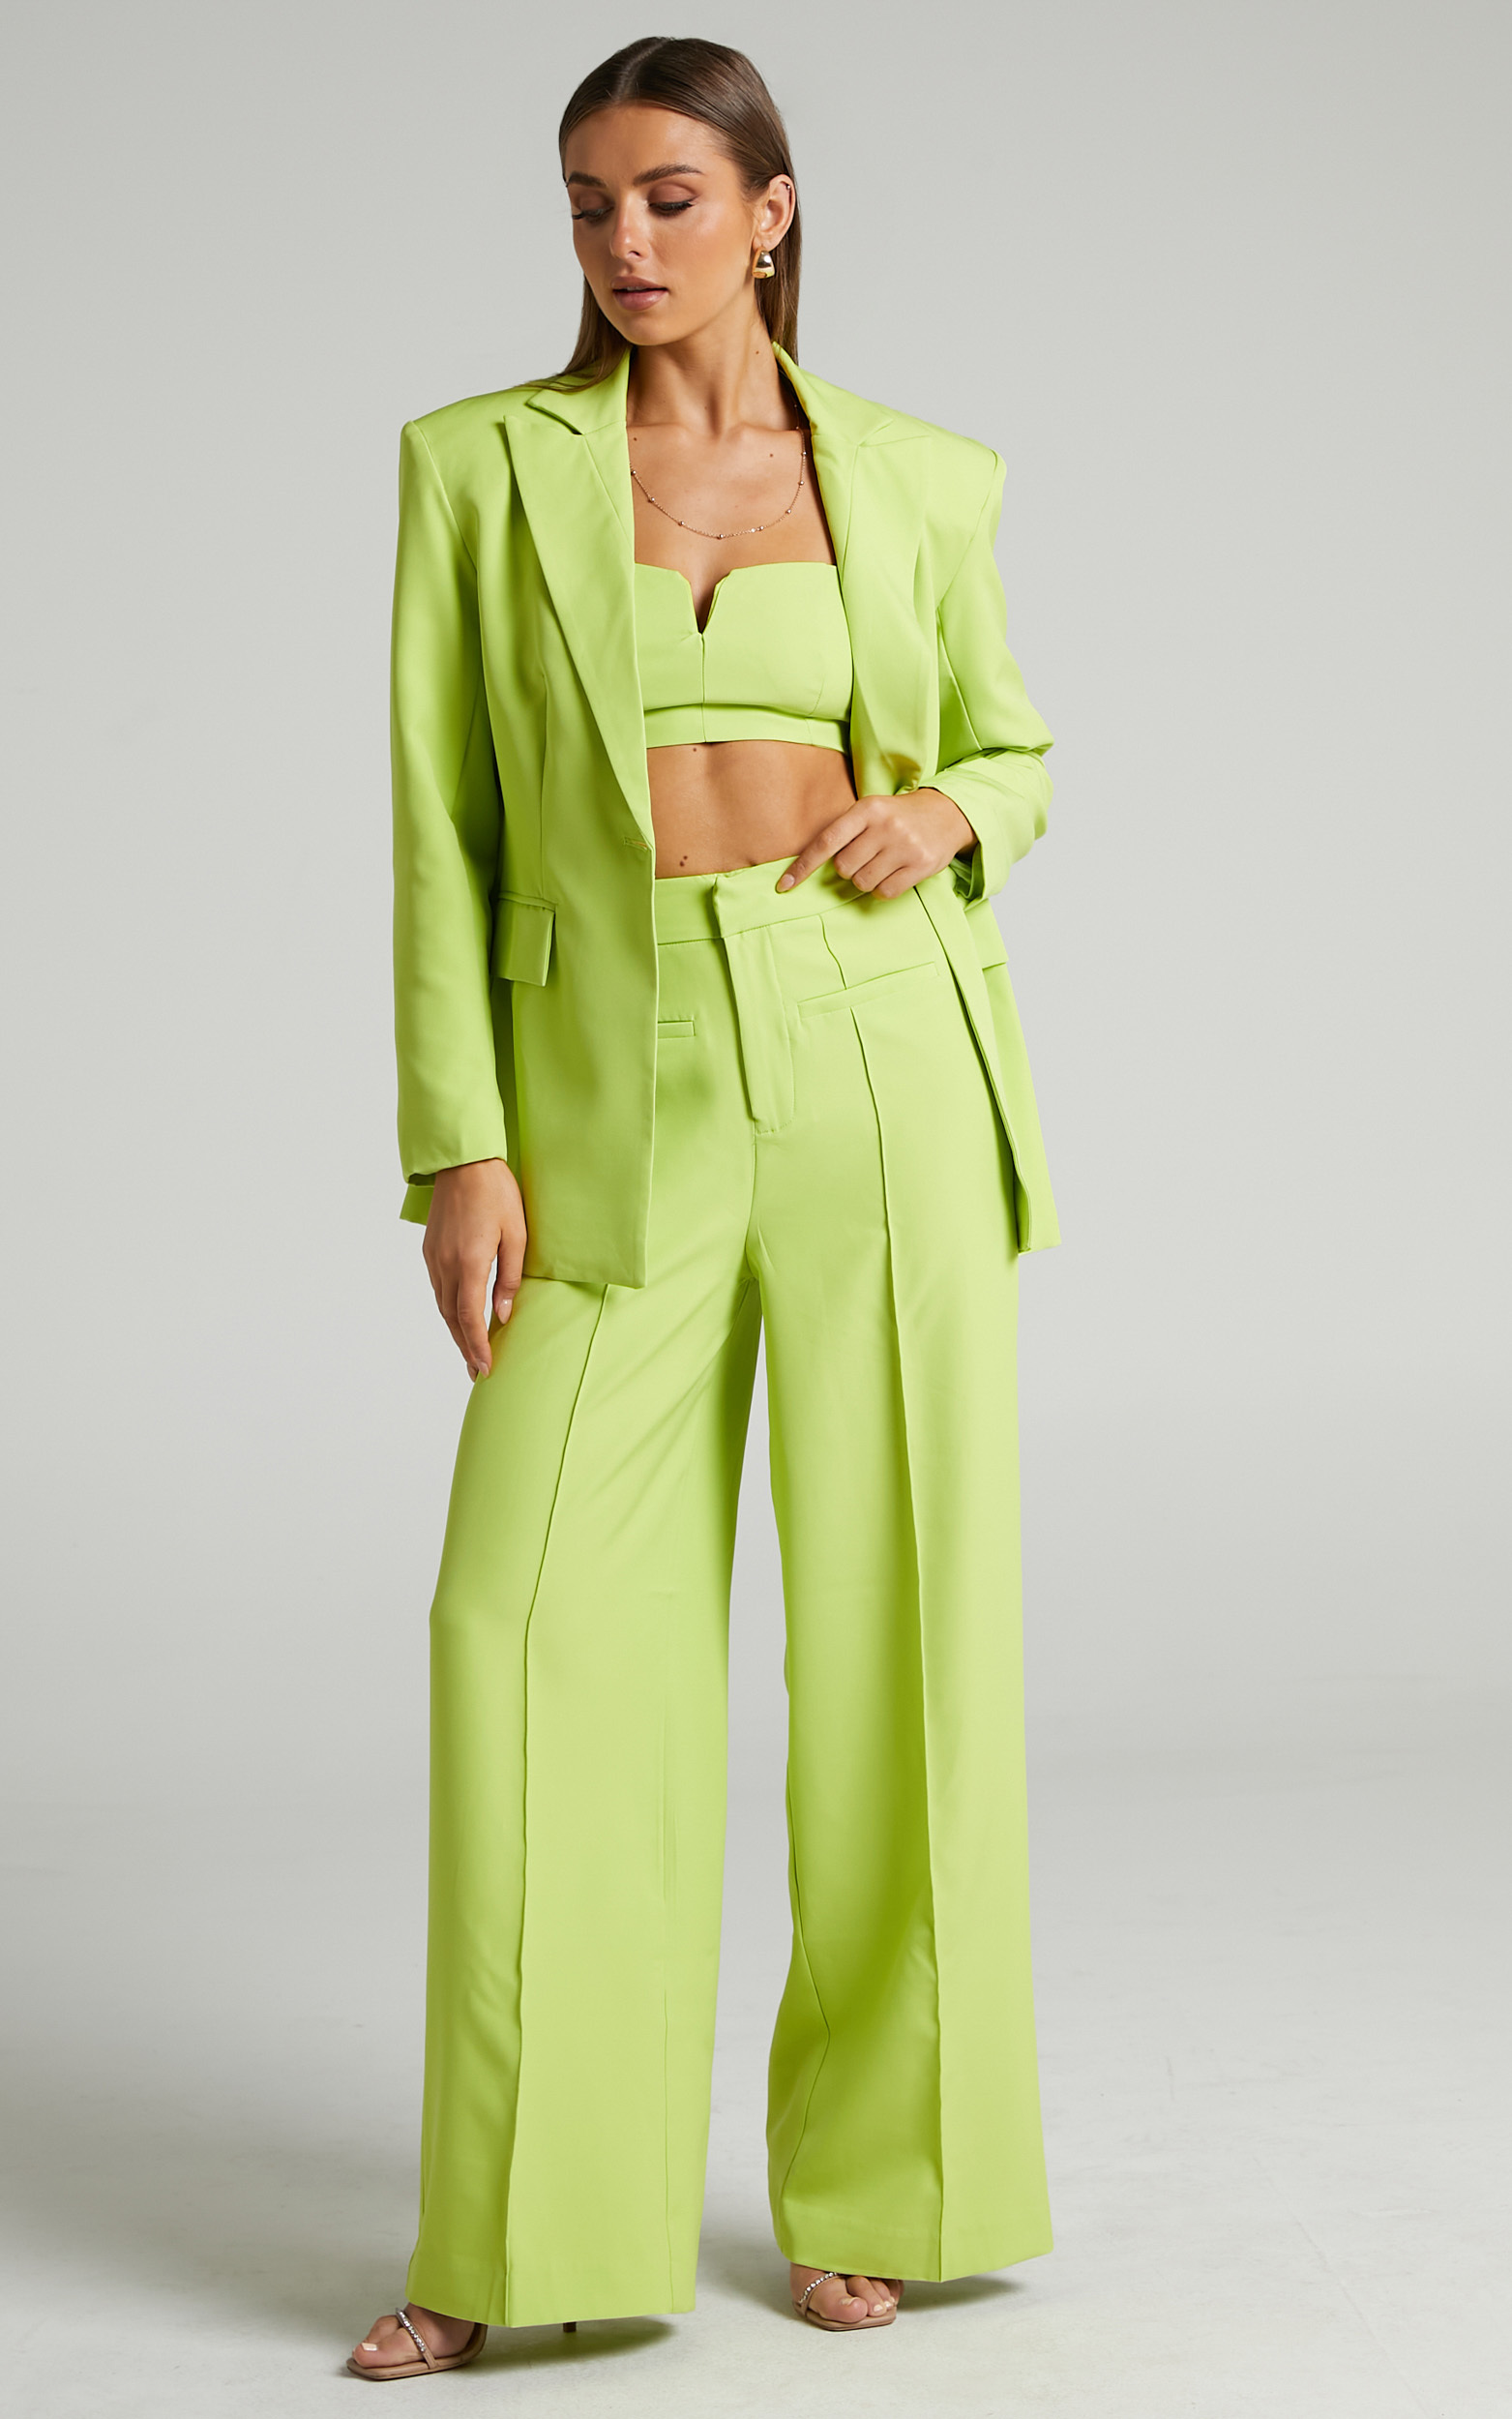 Maida V-Front Crop Top and Wide Leg Pants Two Piece Set in Lime - 06, GRN2, hi-res image number null